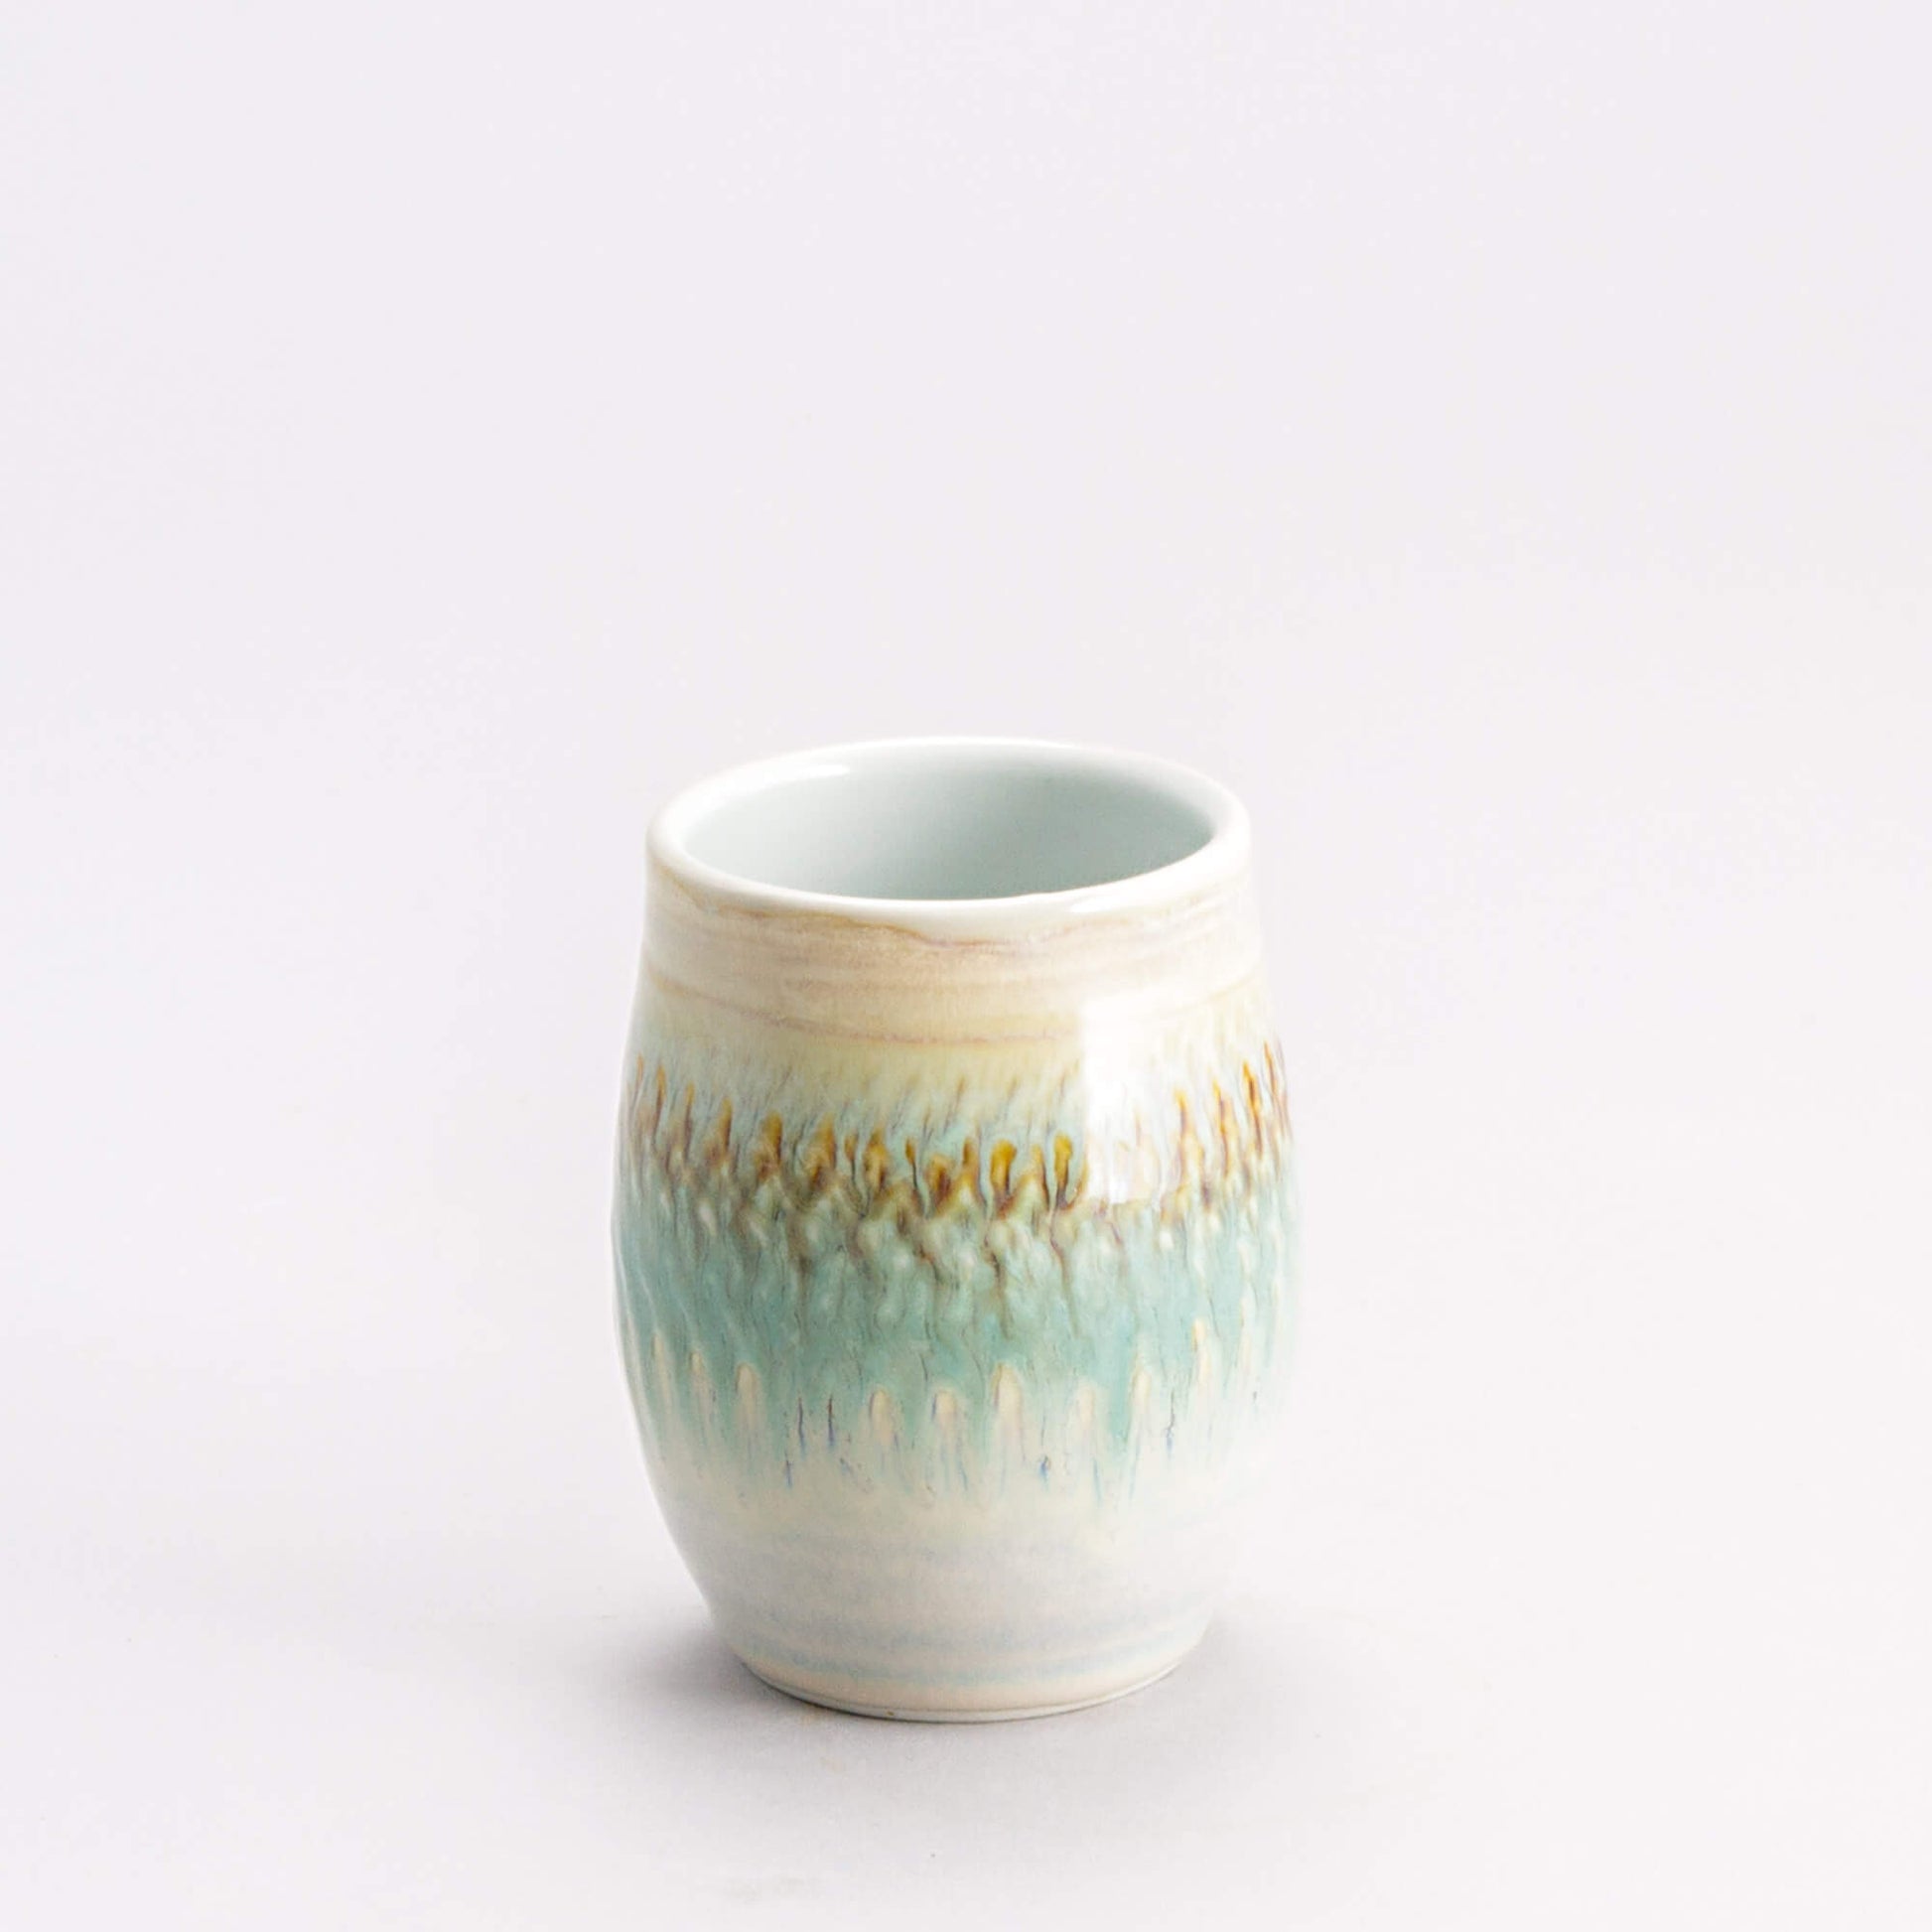 Handmade Pottery Stemless Wine Tumbler made by Georgetown Pottery in Maine Ivory & Green Oribe